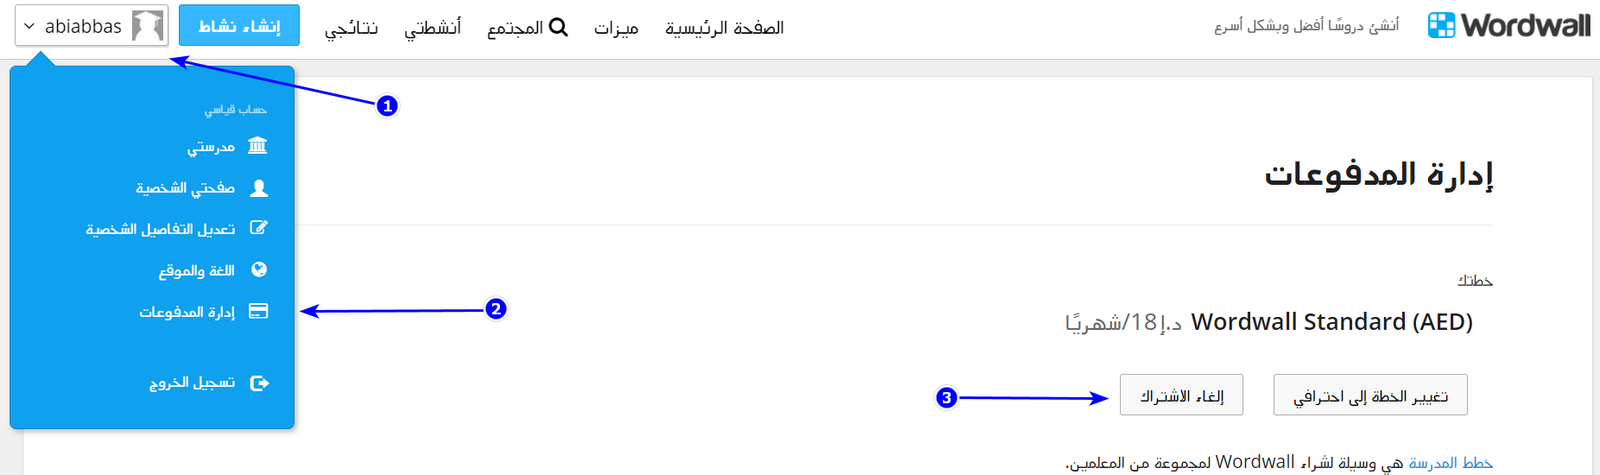 How_do_I_cancel_my_subscription_-_Arabic_1.png